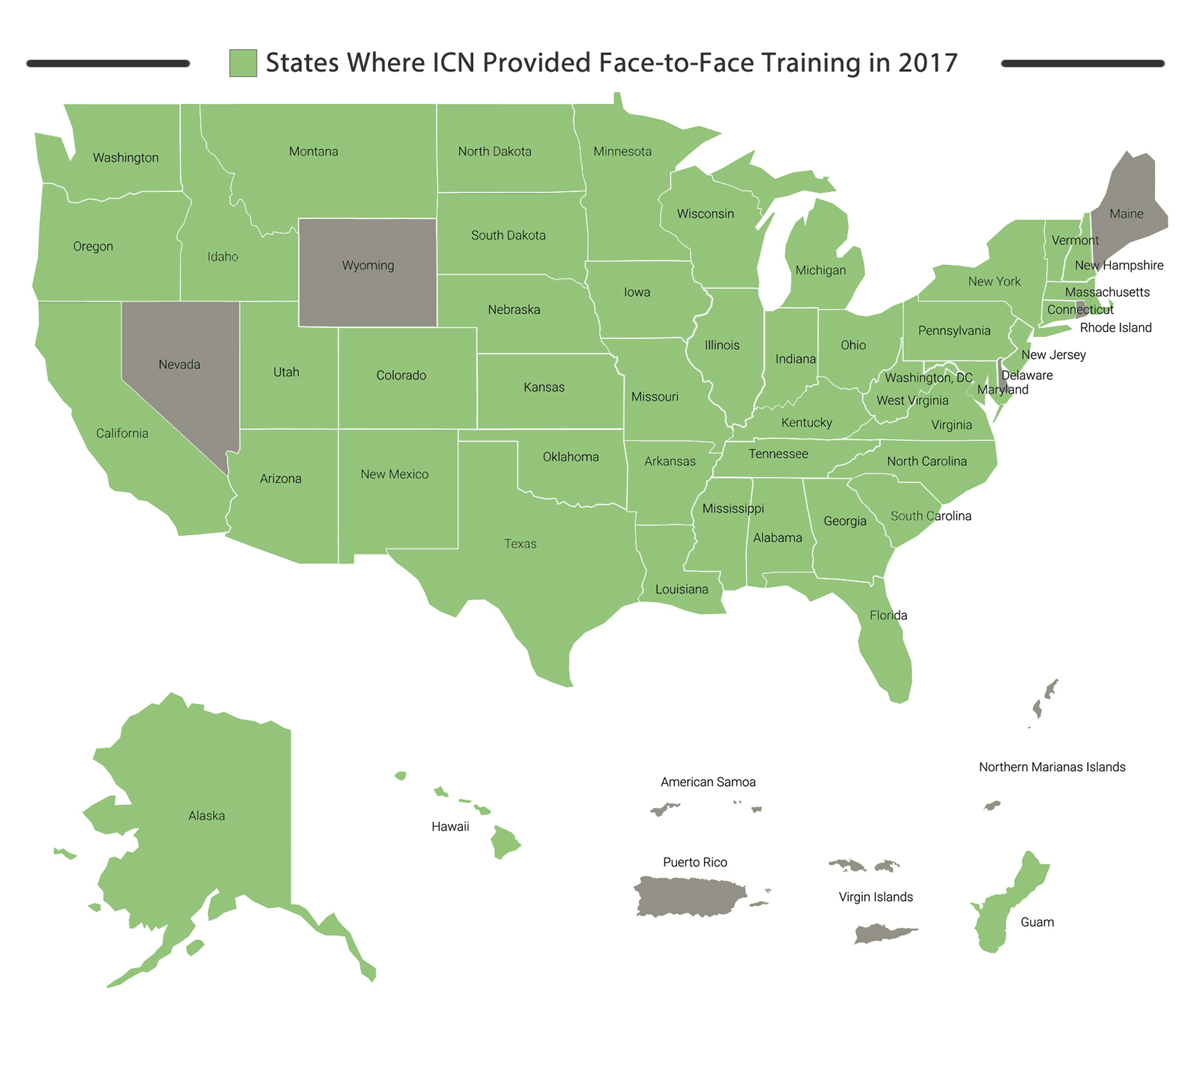 ICN Trainings by State 2017